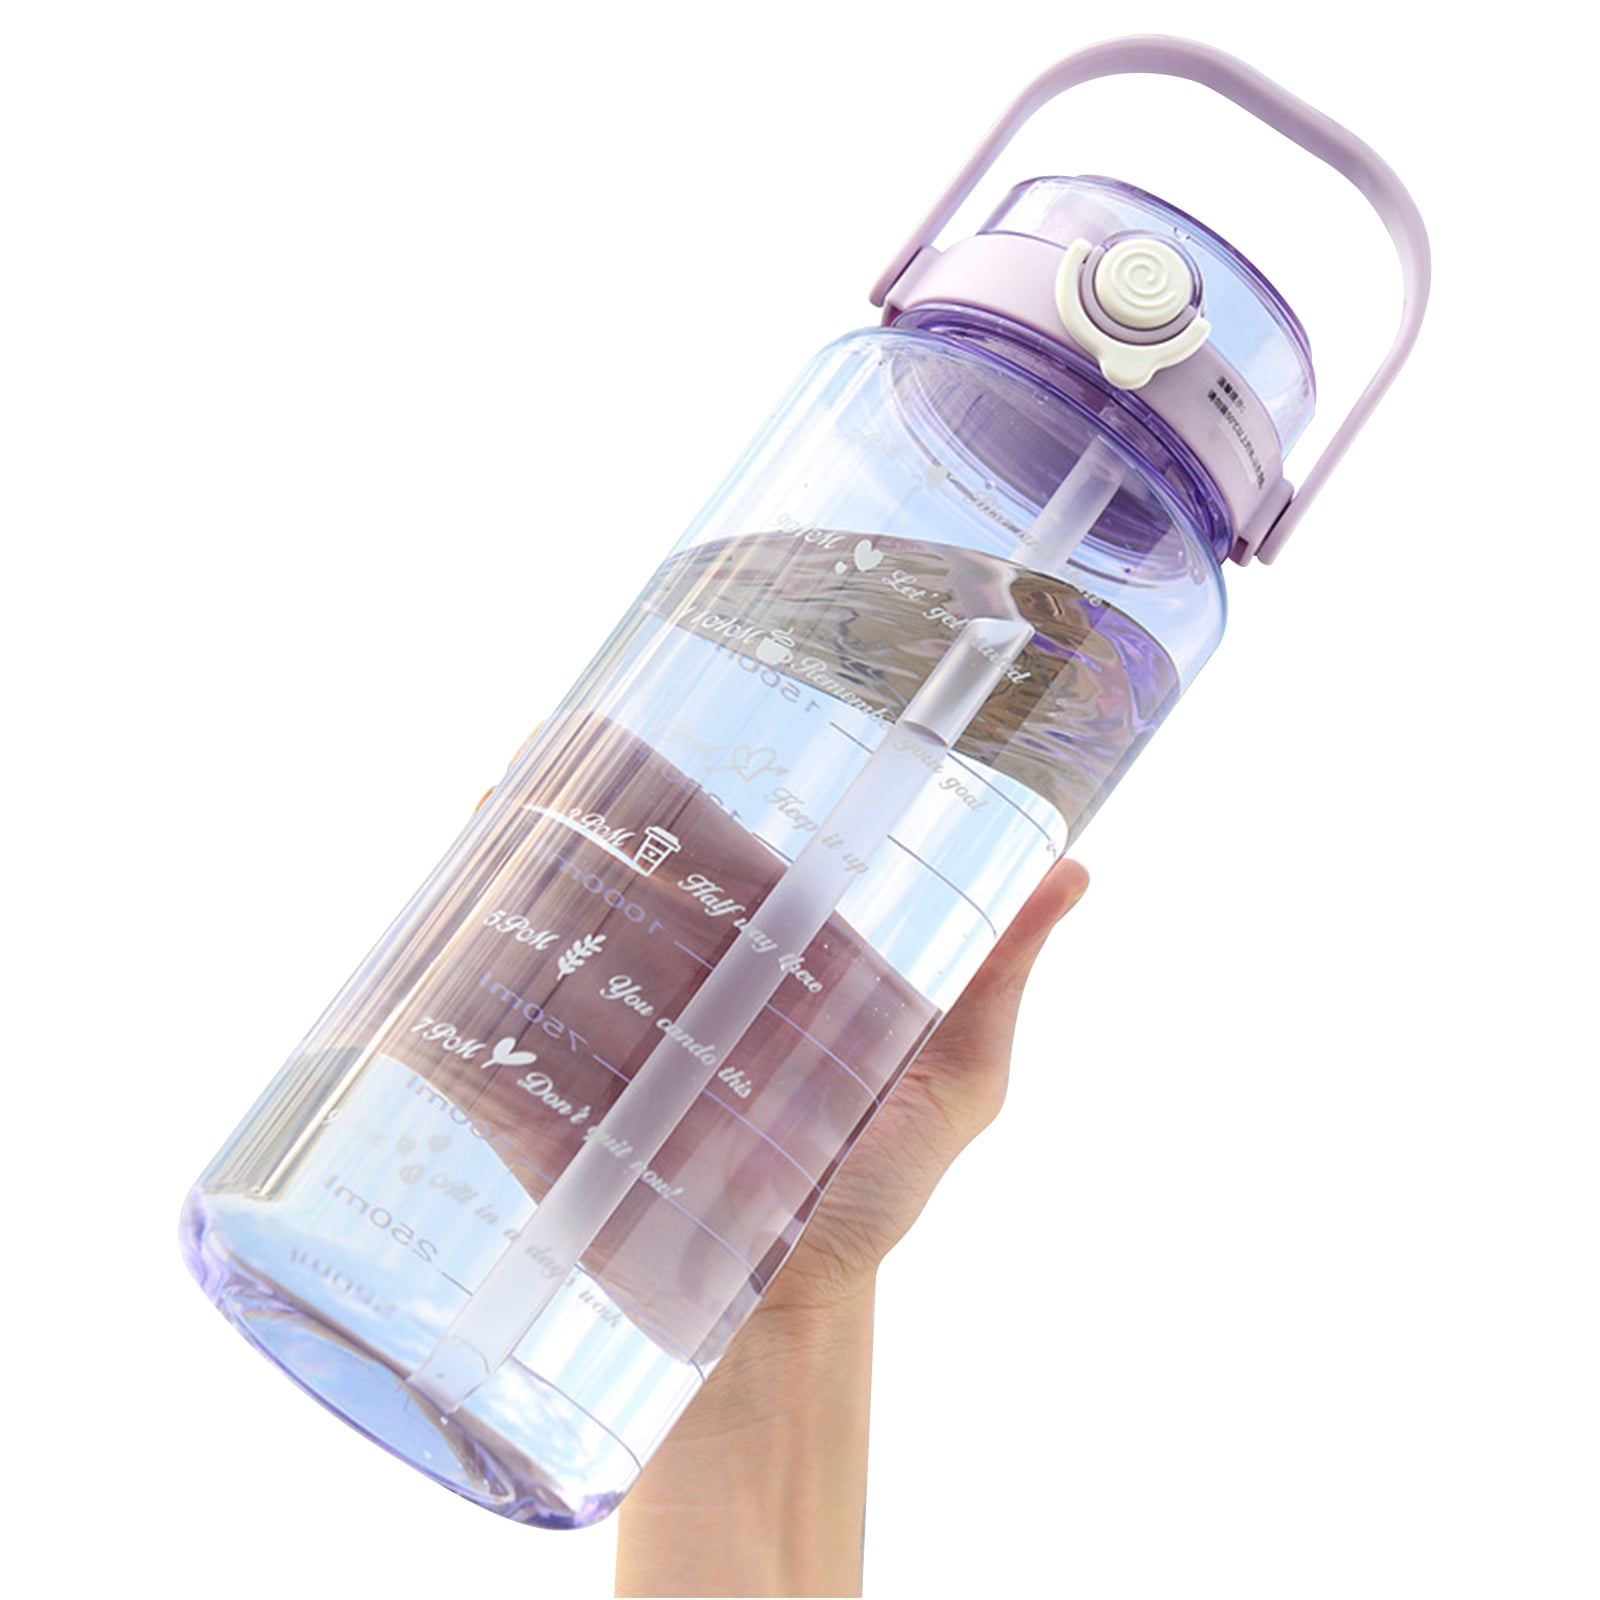 64oz Glass Water Bottles with Straw, Glass Bottle with Silicone Sleeve and Time Marker, for Gym Home Office Brown